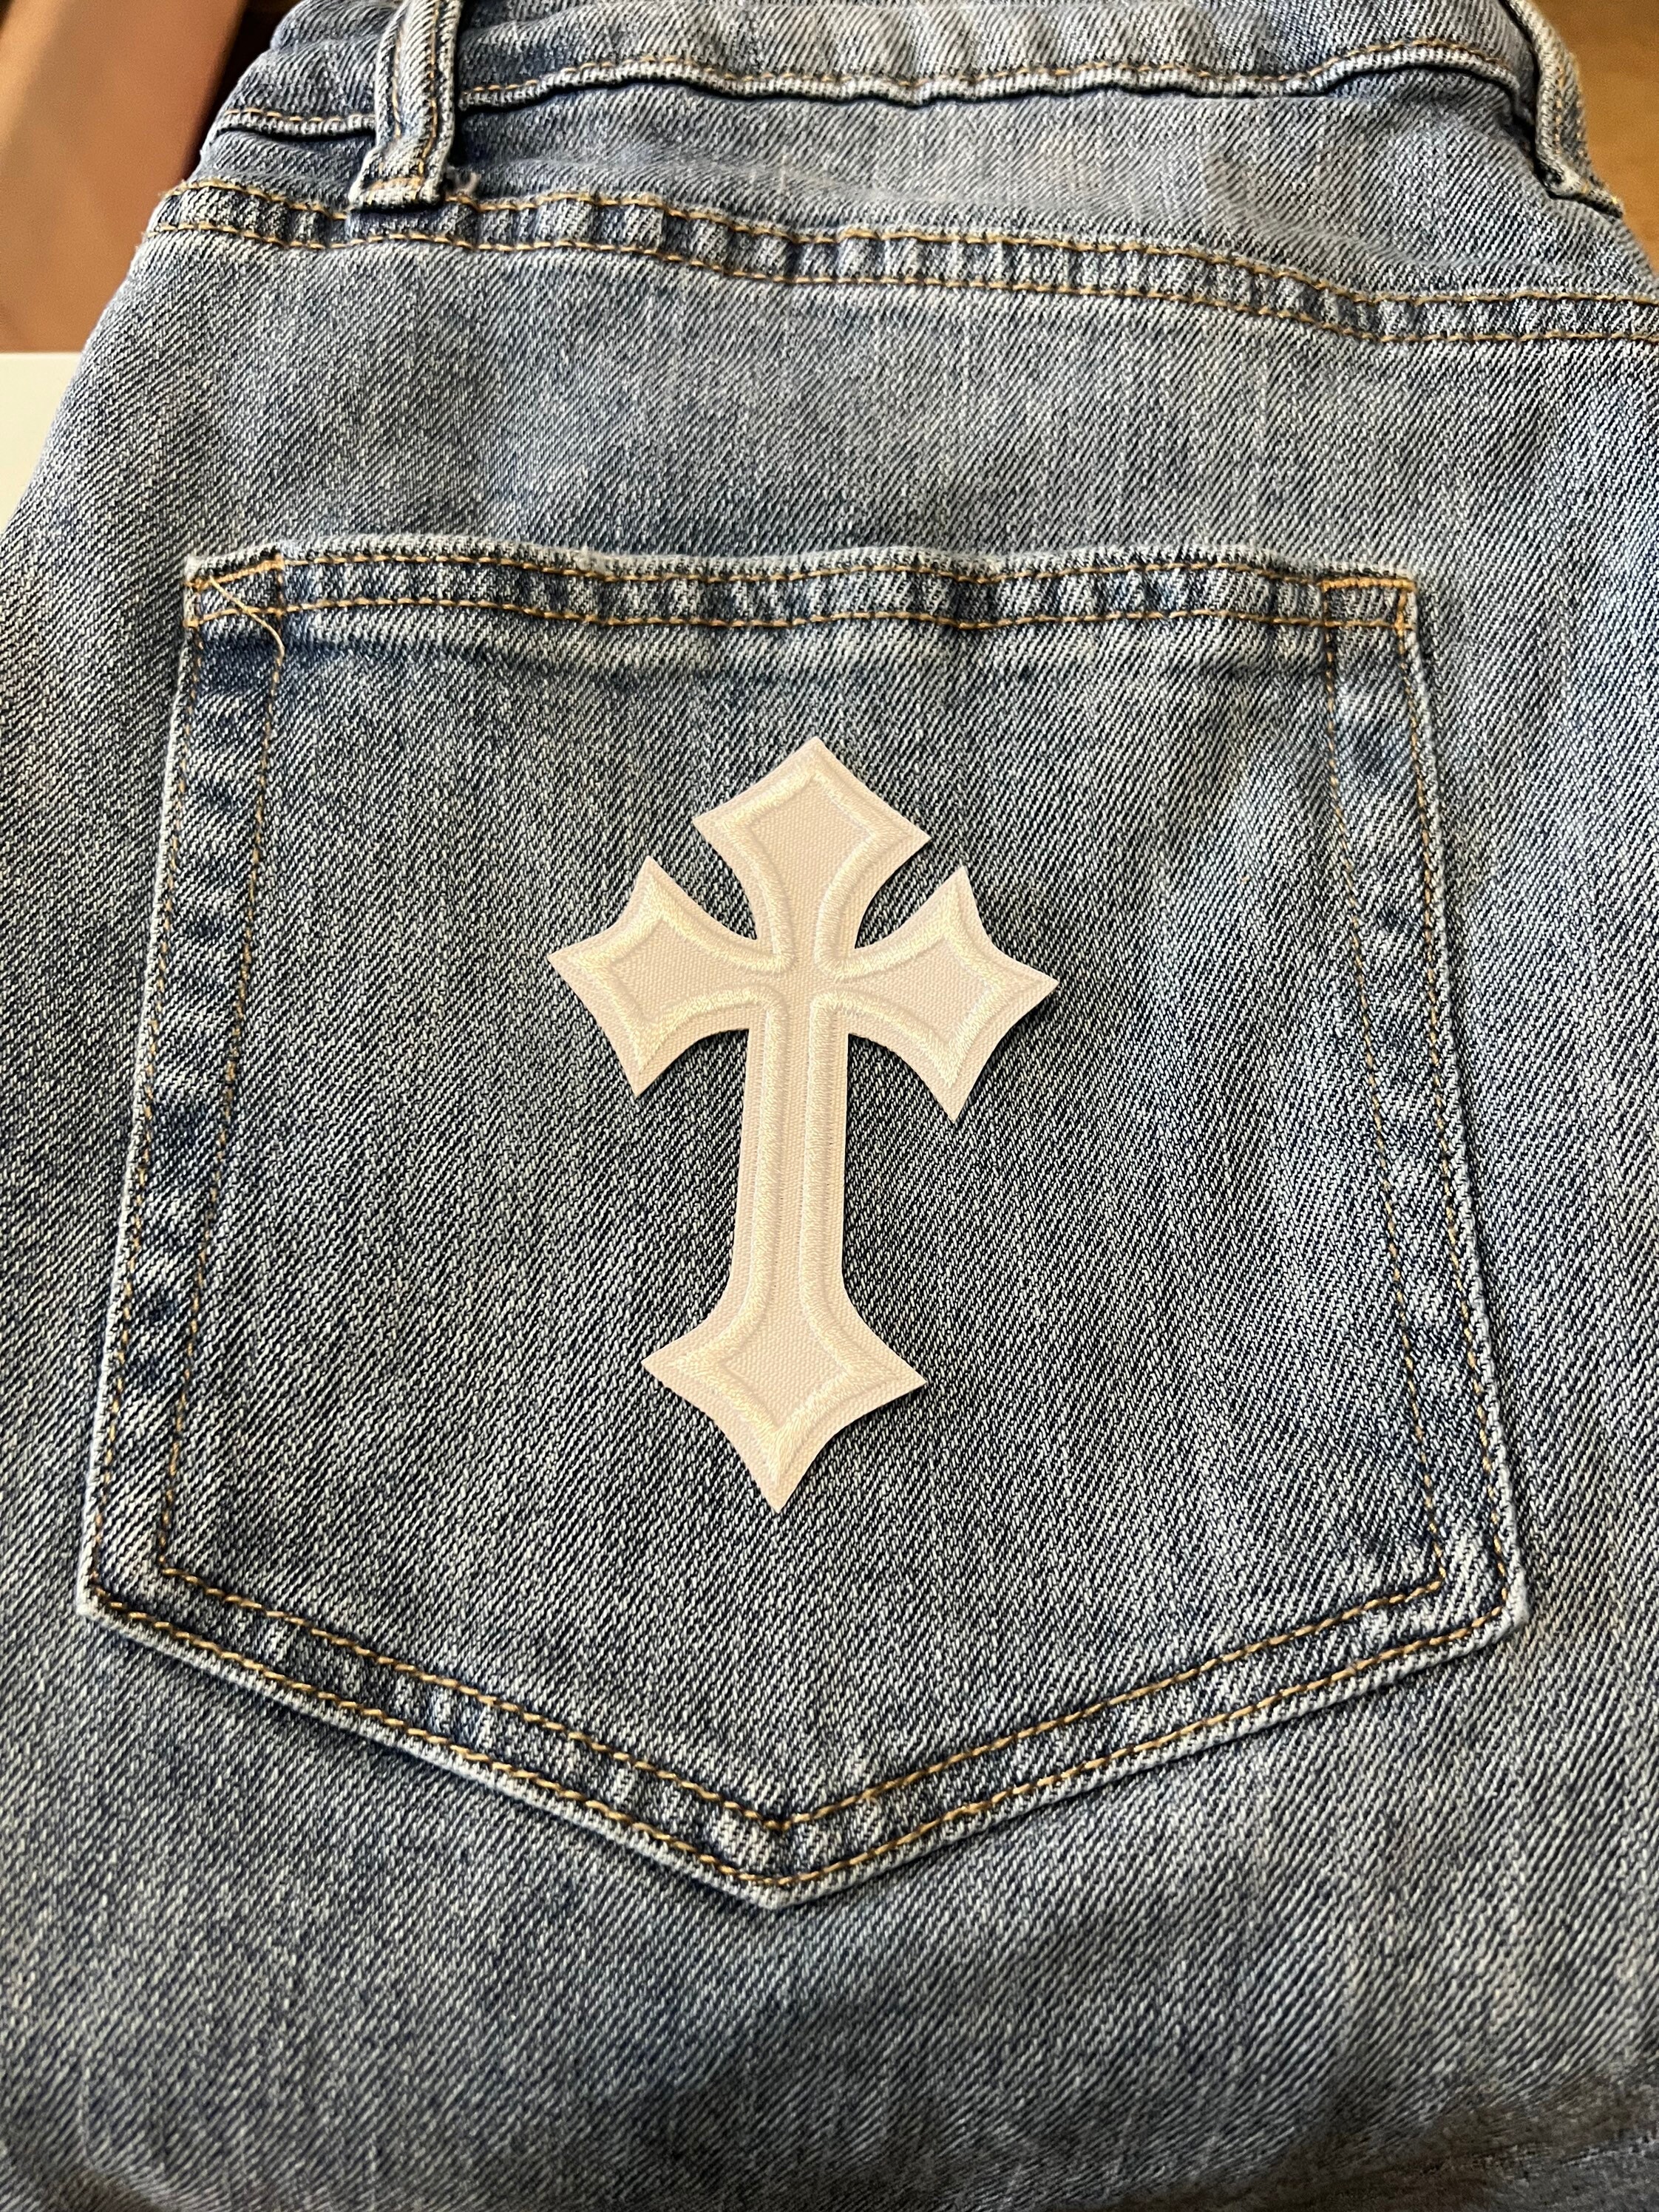 Nicime 11pcs Cross Patches, Iron on/Sew on Cross Applique Patch, DIY Iron  Patches for Jeans Hats Shirts Jackets Backpacks